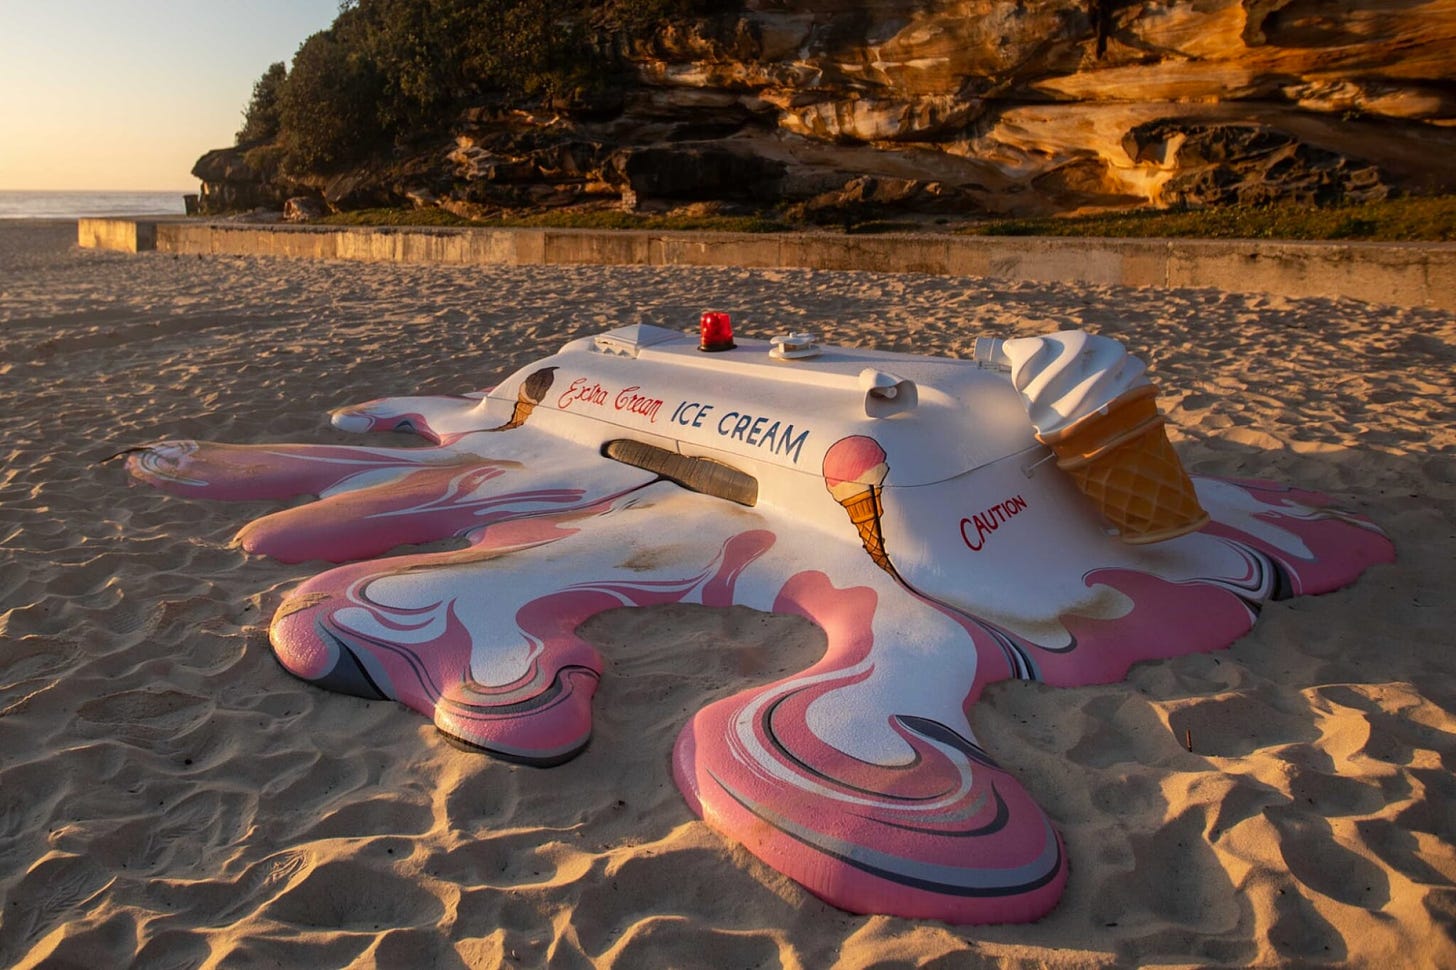 Ice cream truck melting into a beach sculpture by The Glue Society and James Dive.